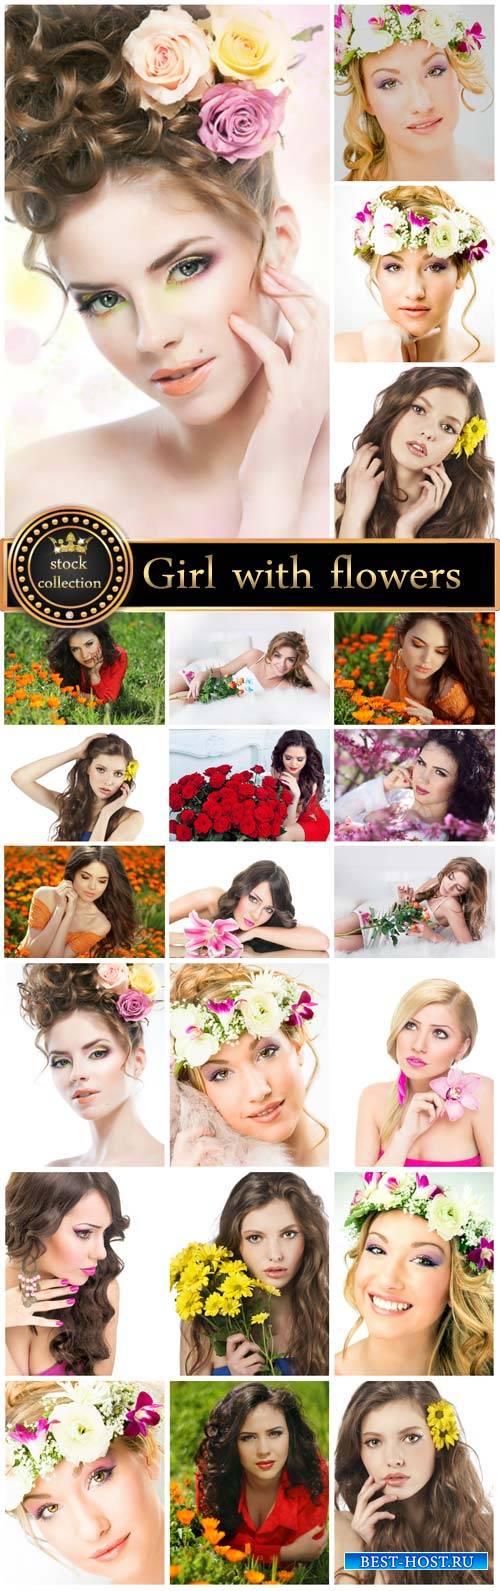 Beautiful girl with flowers - Stock photo collection